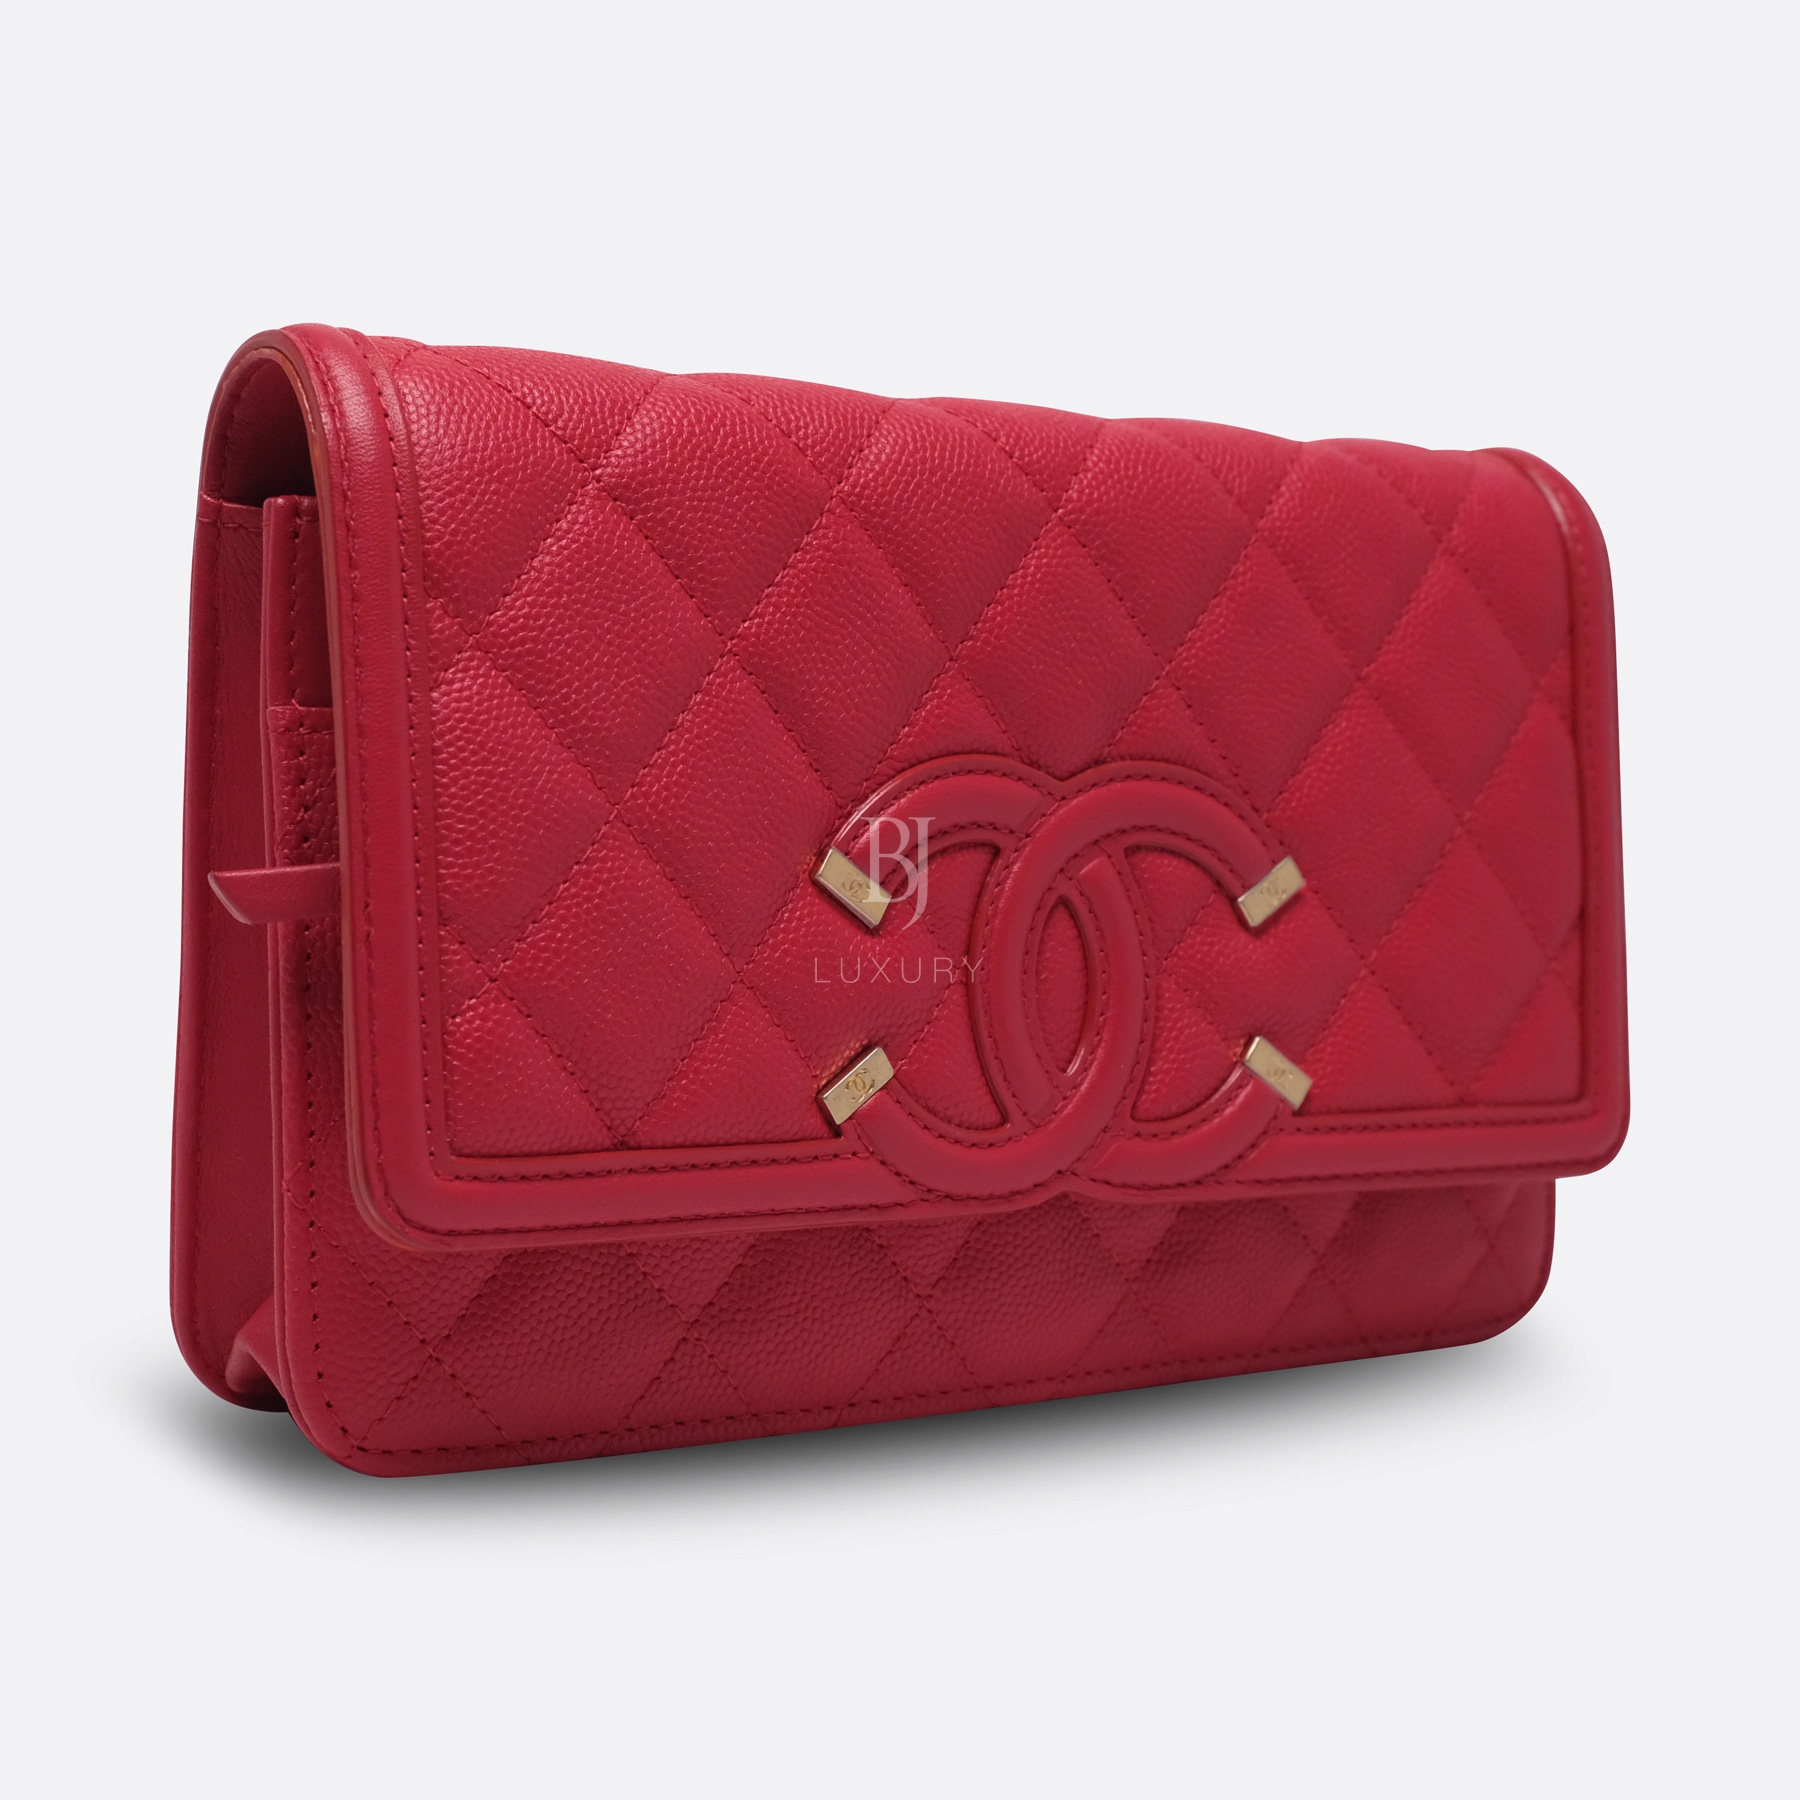 Chanel Wallet On Chain Red Caviar Brushed Gold BJ Luxury 2.jpg